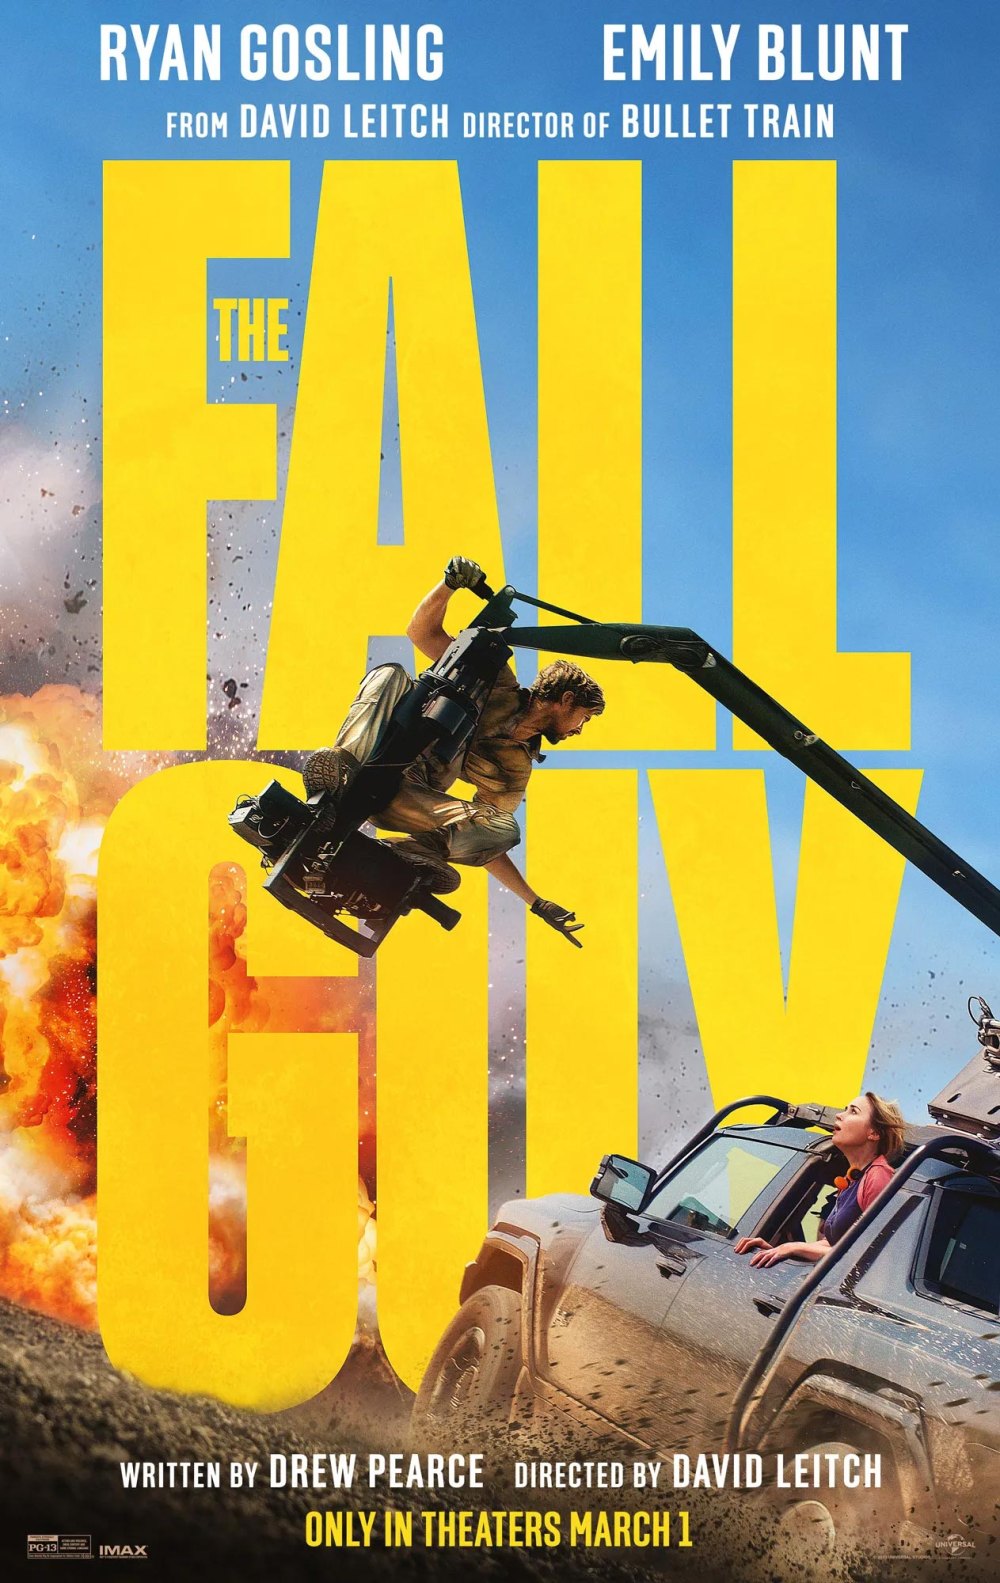 The Oscars Are Finally Considering a Stunt Person Category Thanks to Ryan Gosling's 'The Fall Guy'